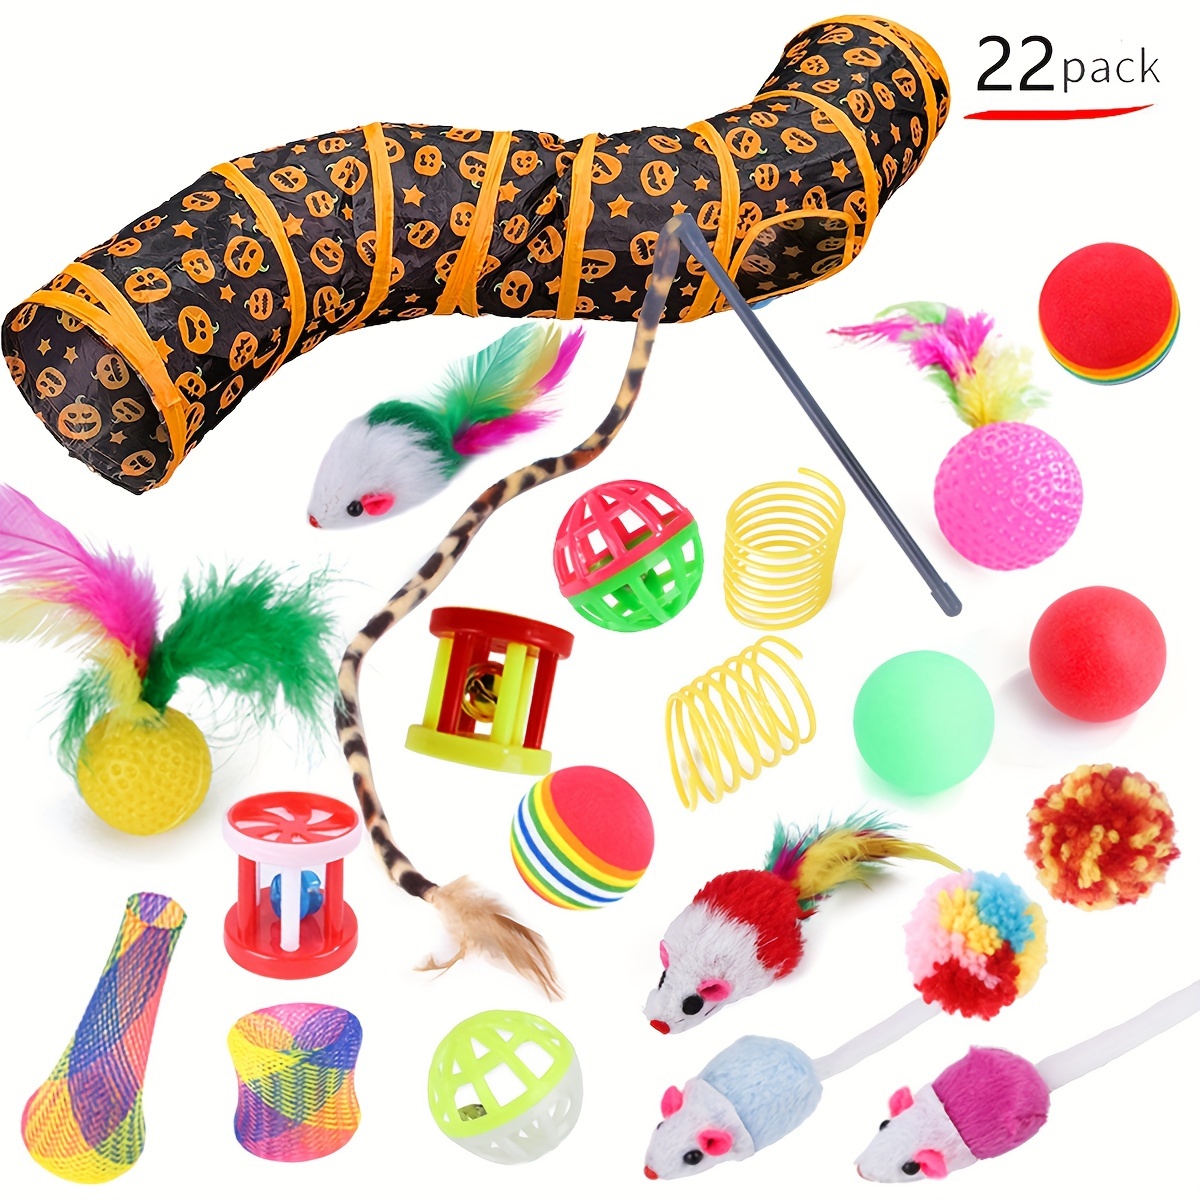 

22-piece Cat Toy Variety Pack With Polyester Blend Cat Tunnel - Interactive Play Set For Kittens Includes Crinkle Balls, Feathers & Durable Playballs - Multi-textured Assorted Toys For Indoor Cats